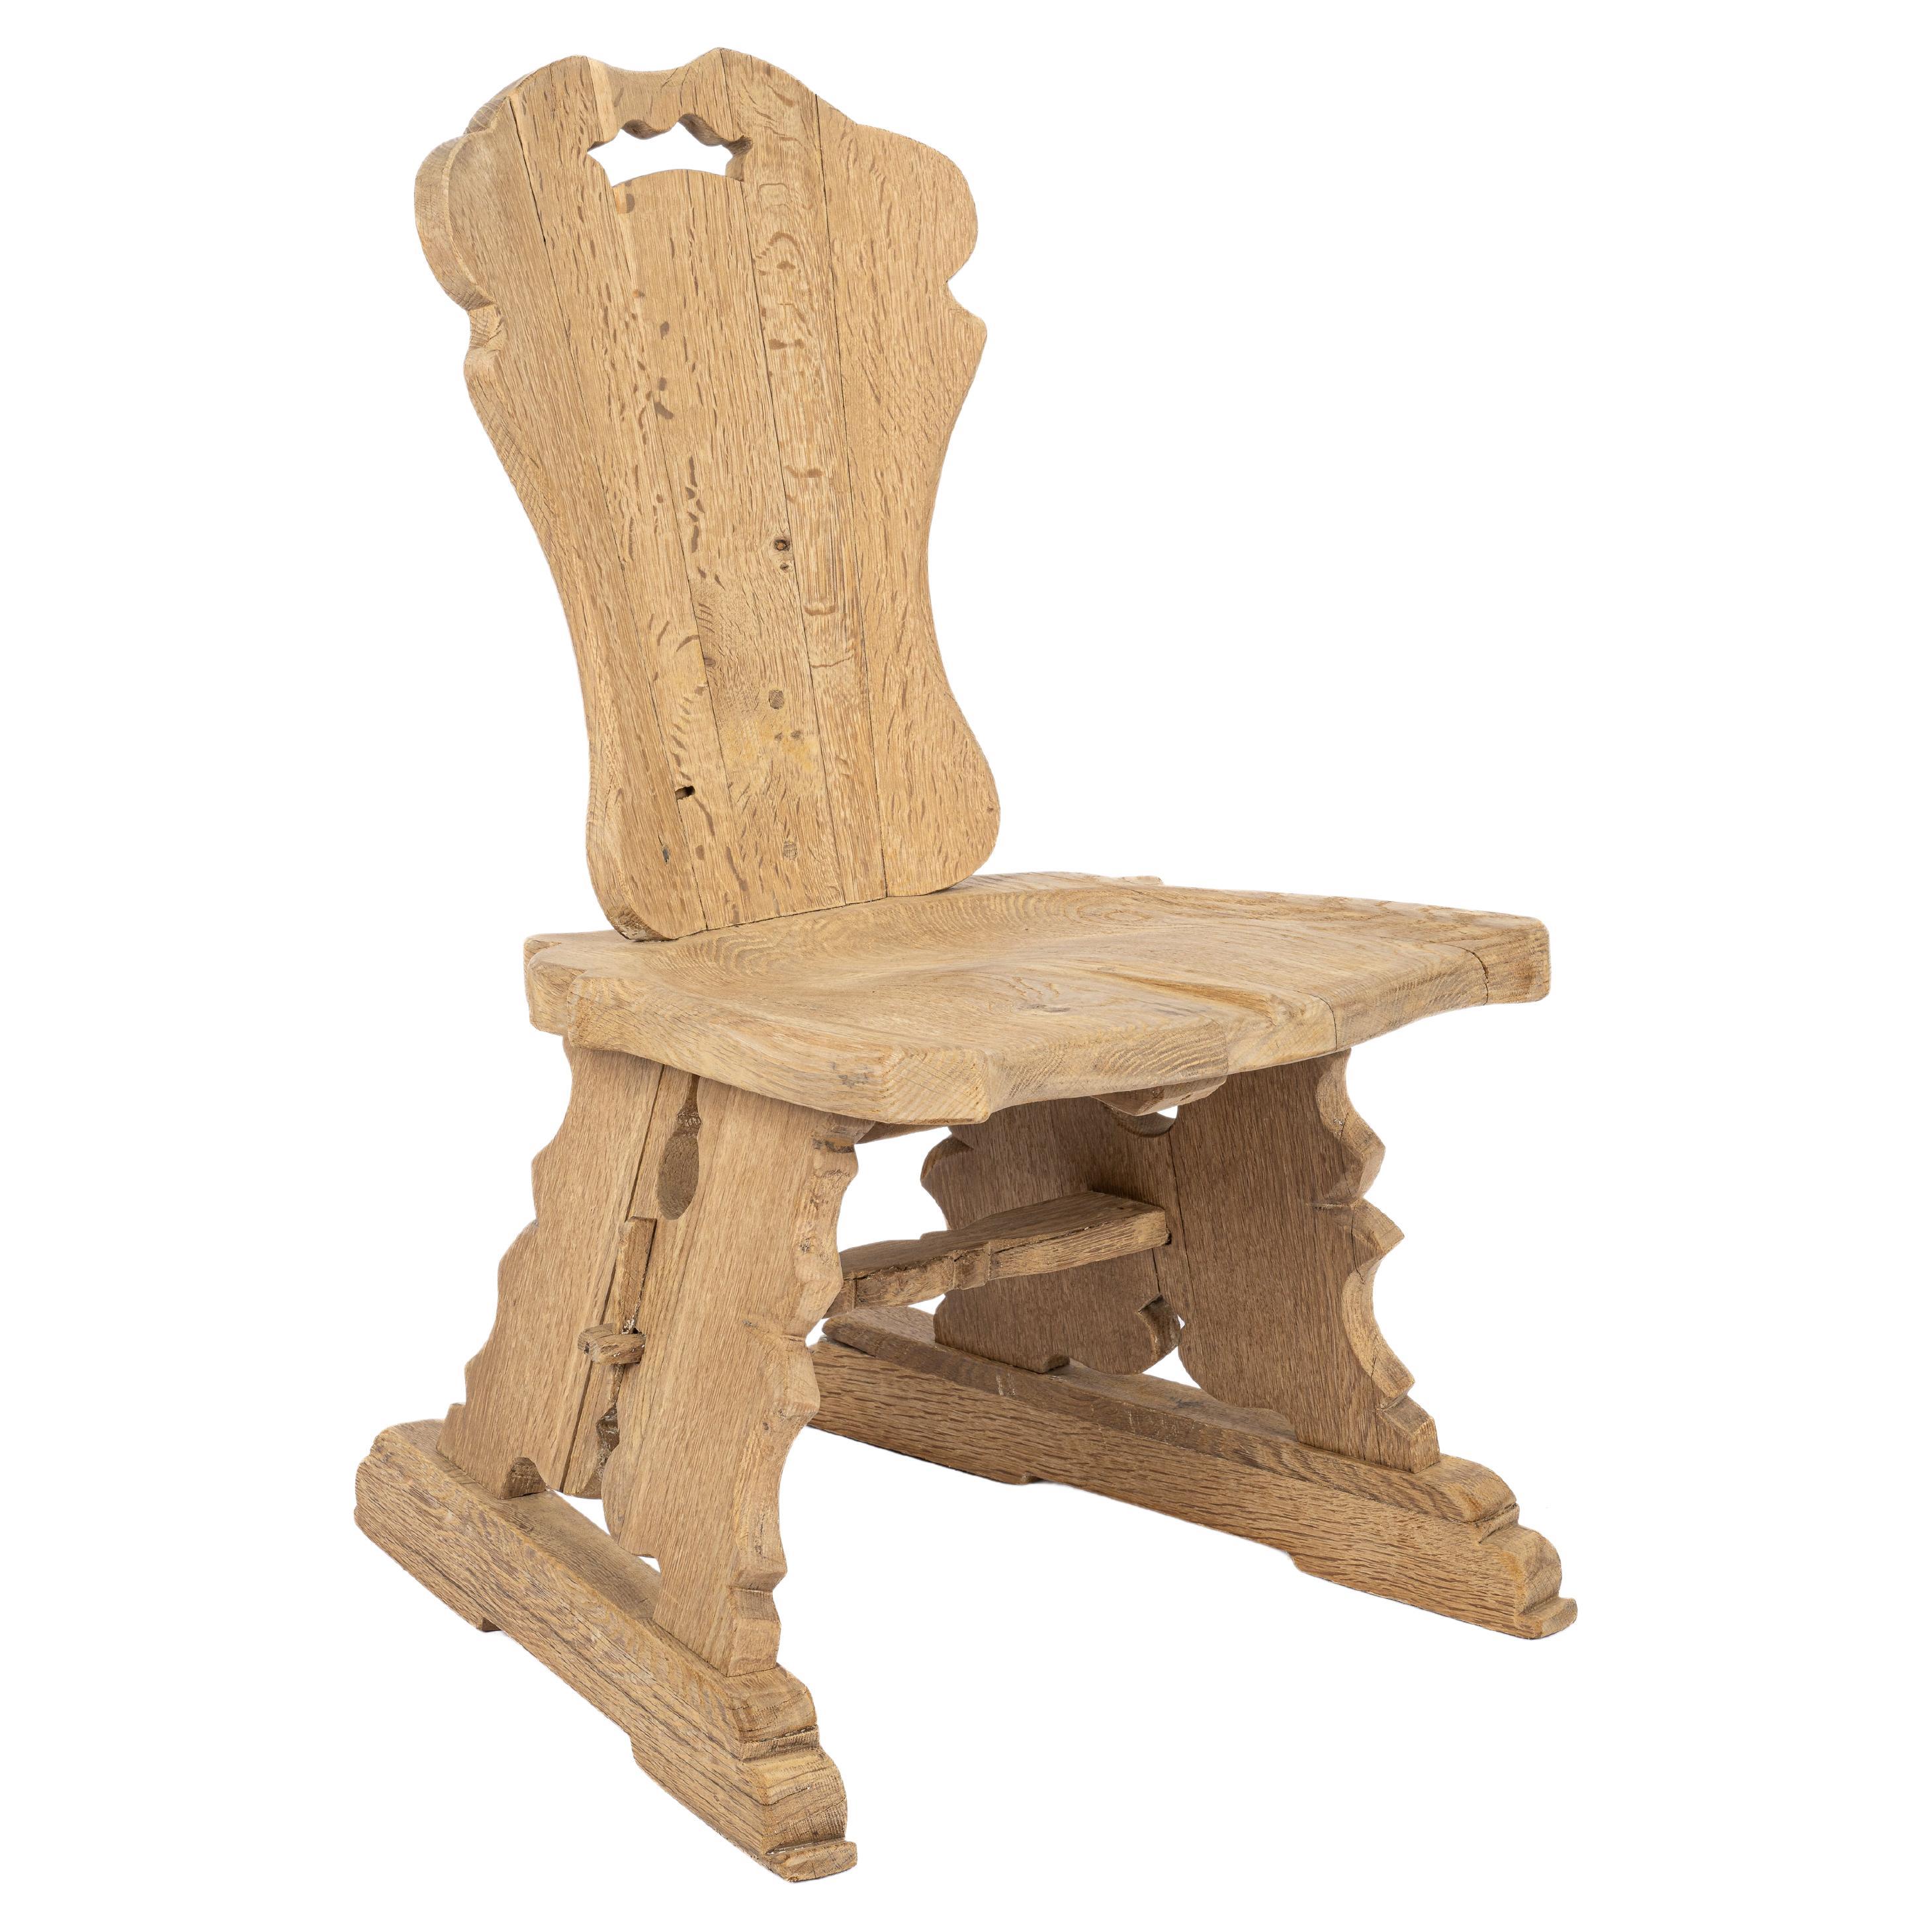 Solid European Oak sculpted chair made by Piet Rombouts circa 1950 Netherlands For Sale